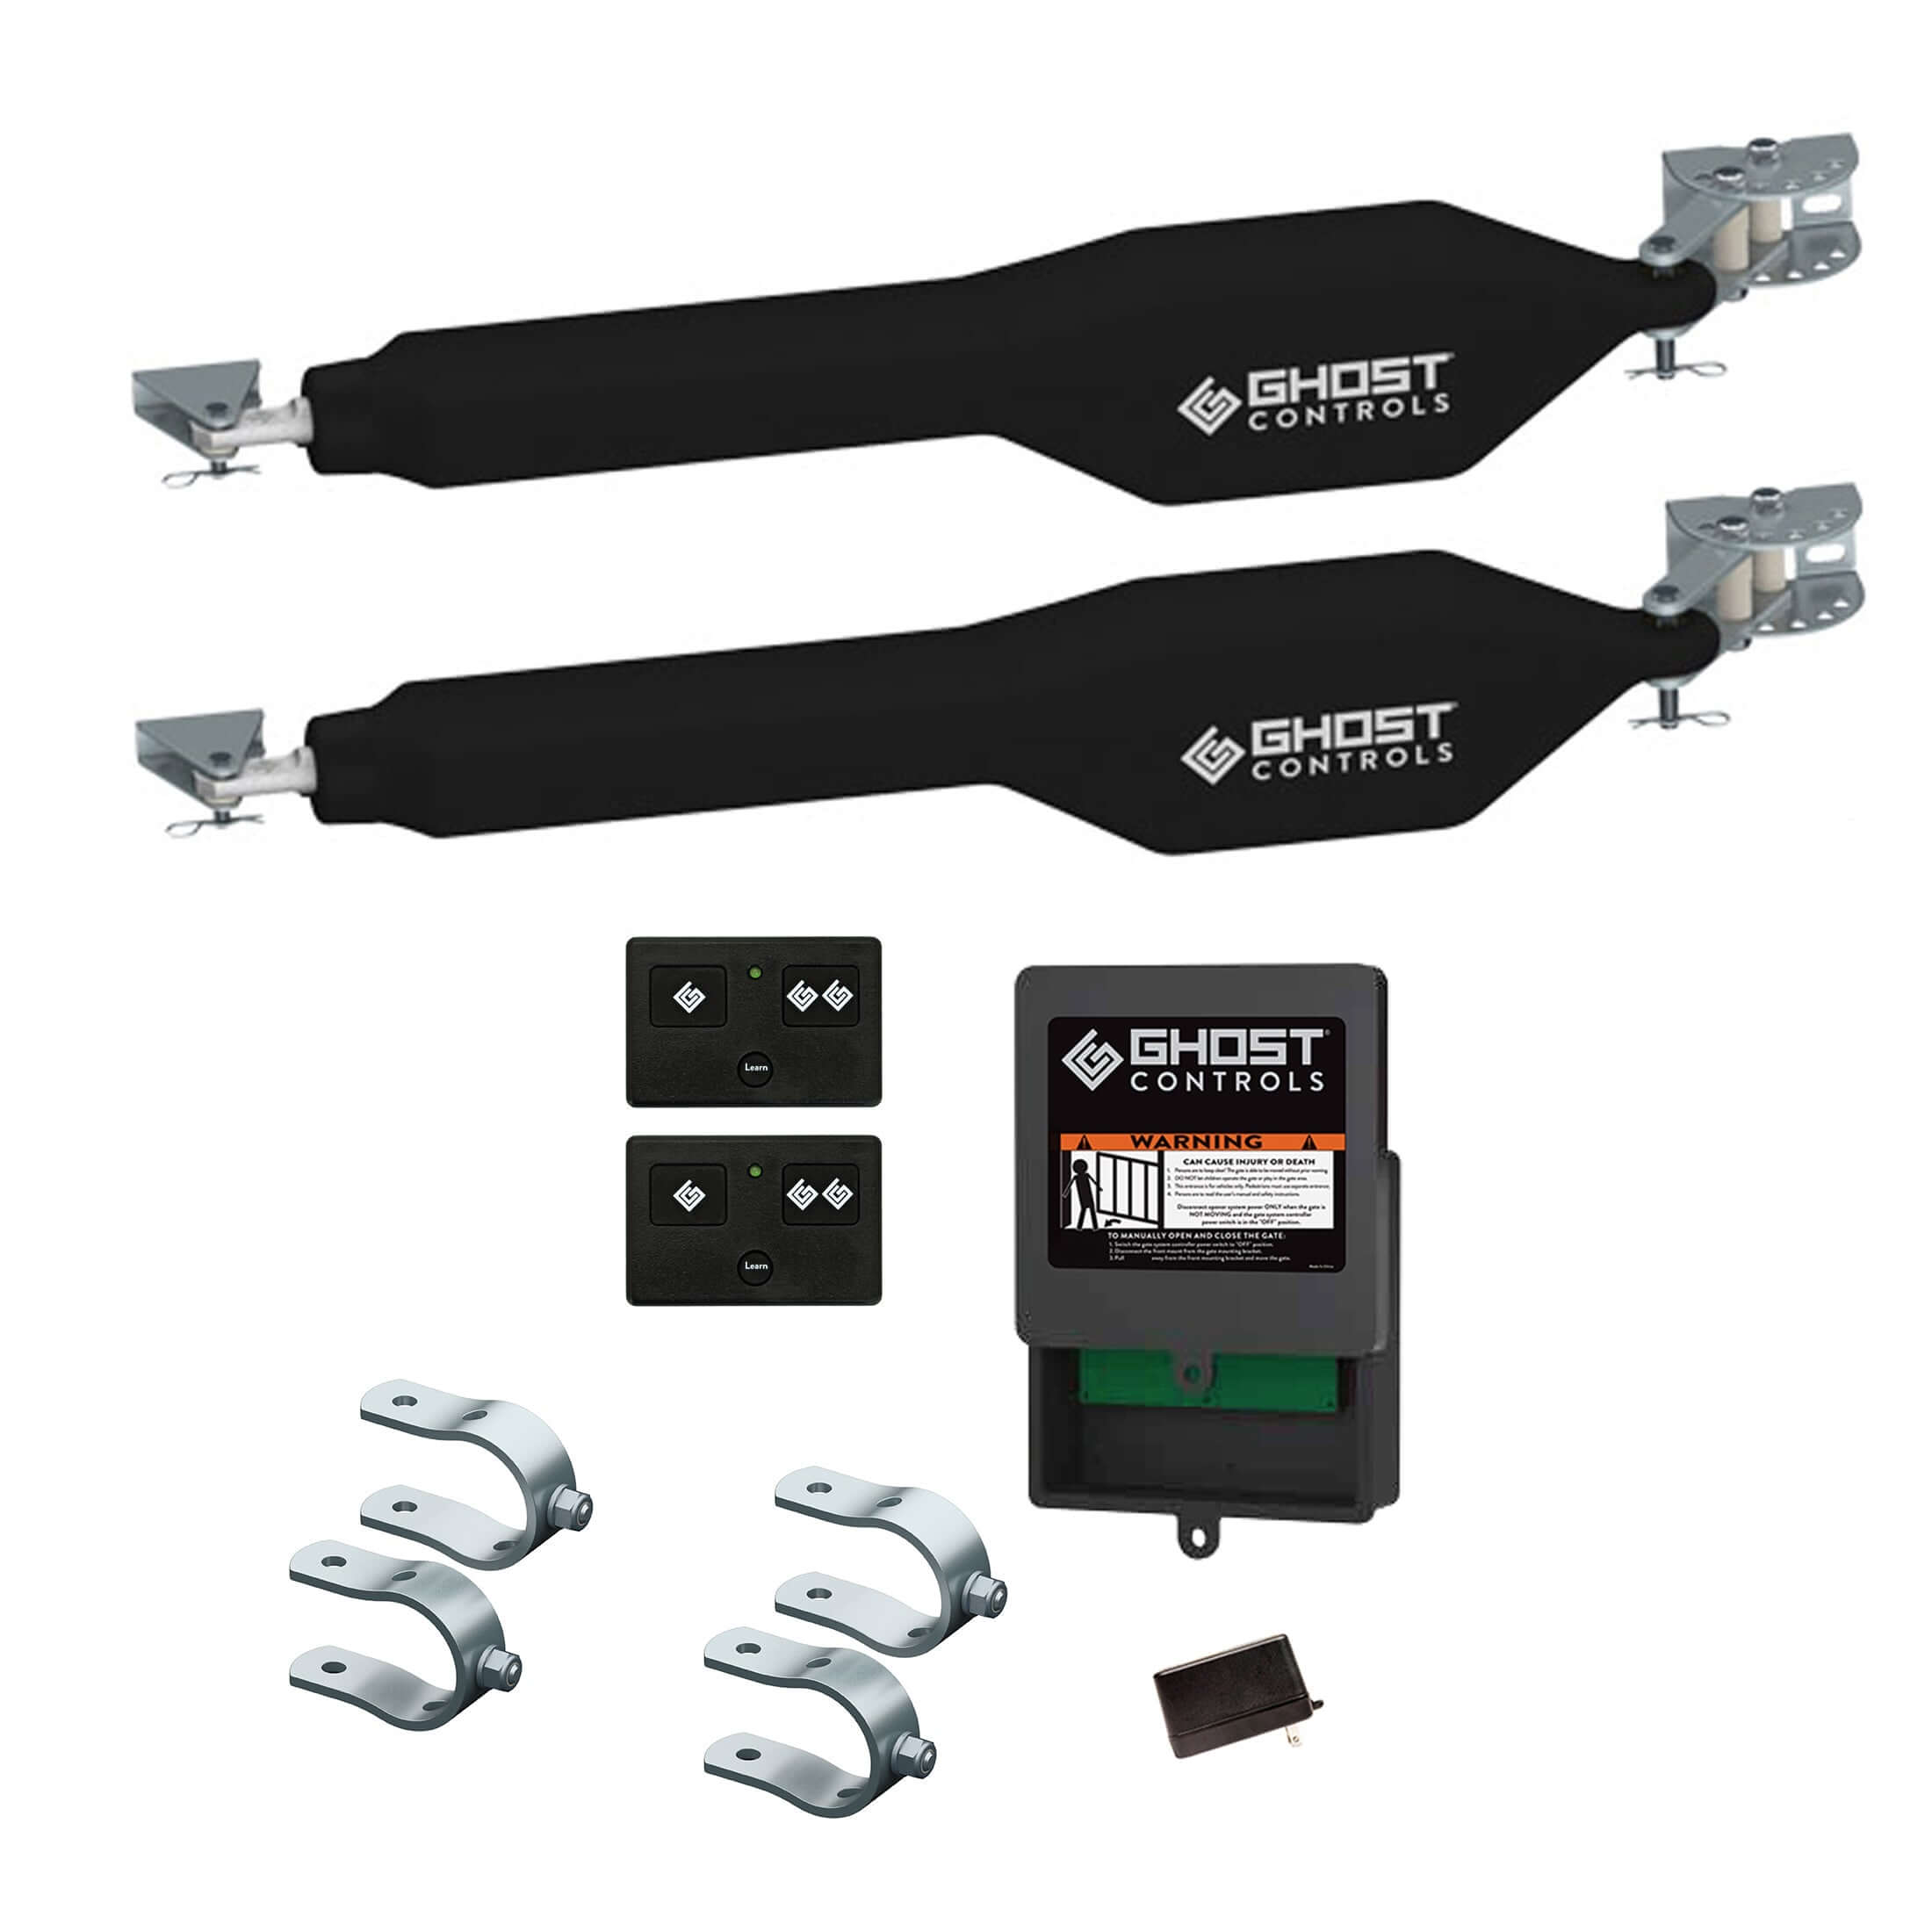 Smart Ready Dual Ghost Controls Heavy Duty Gate Opener kit for tube and decorative dual gates